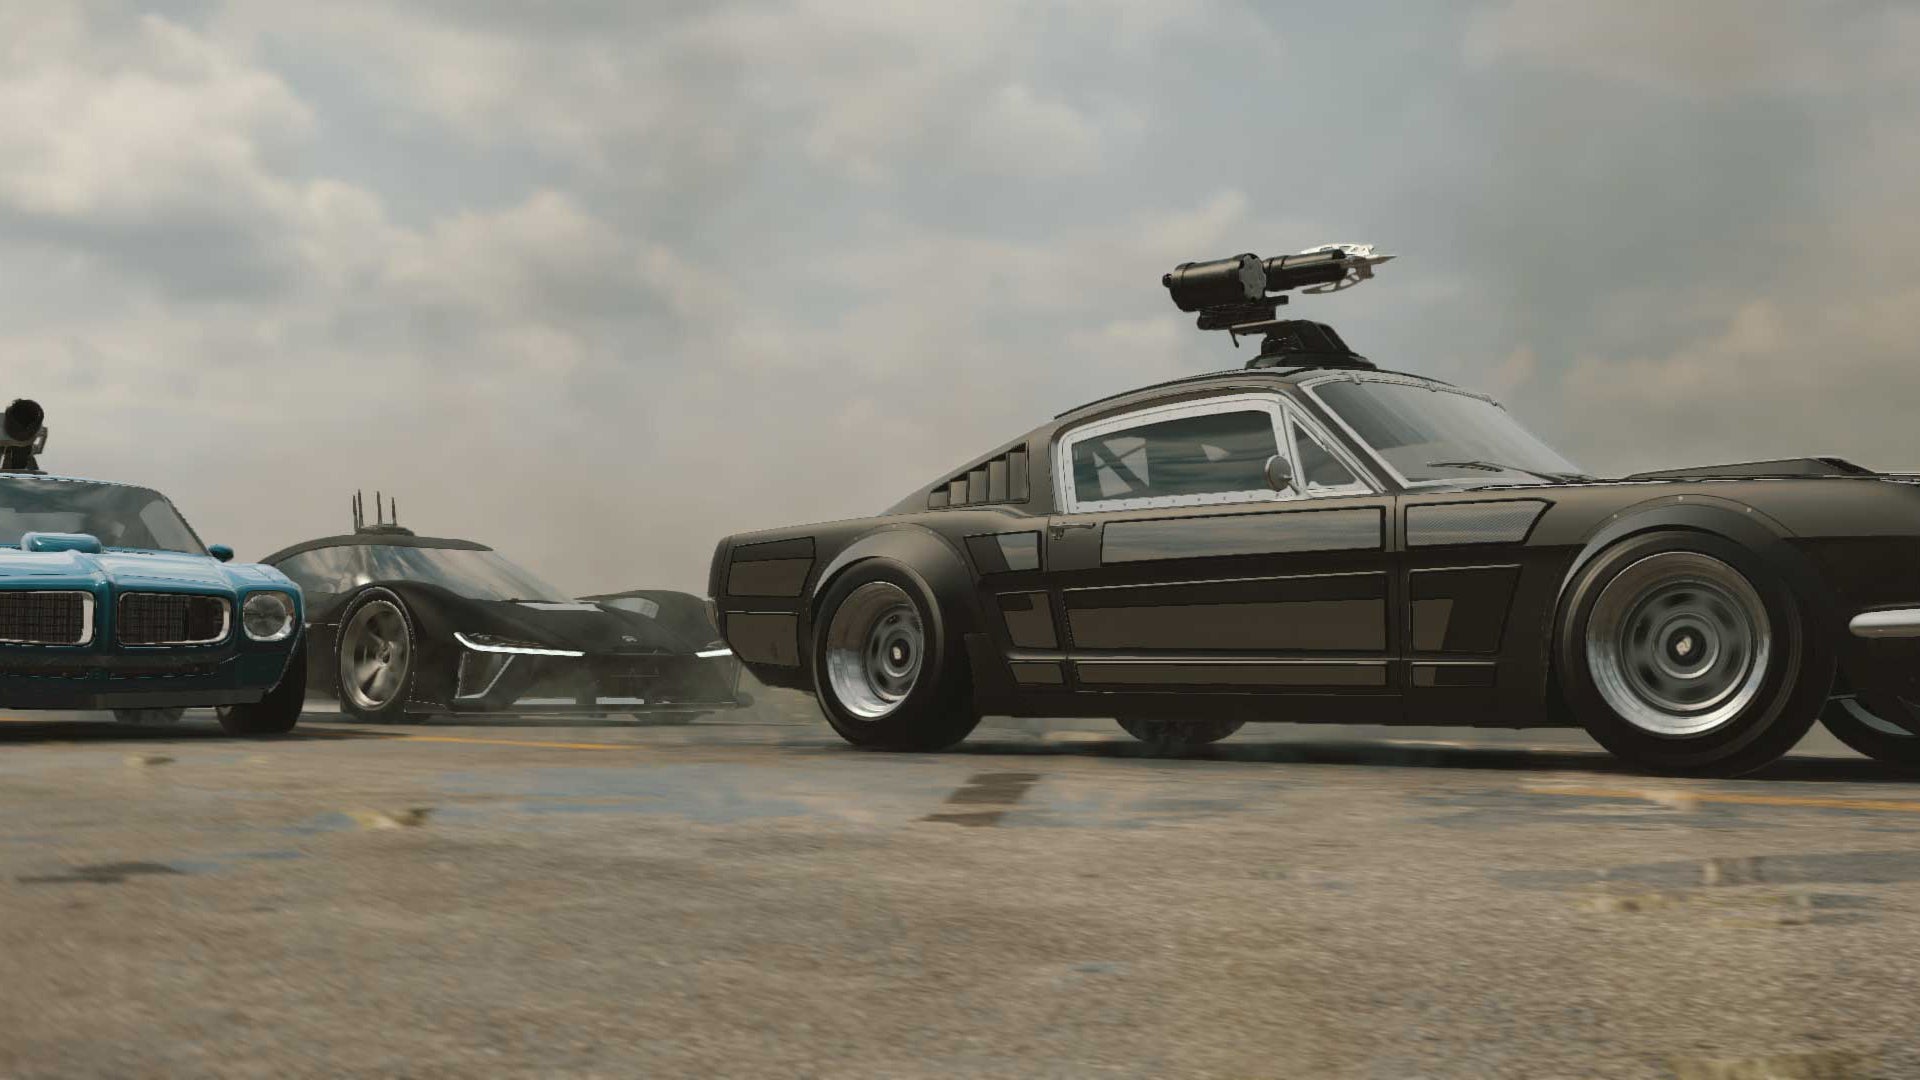 Image for Fast & Furious Game's Release Date "Uncertain" In Wake of Fast 9's Delay